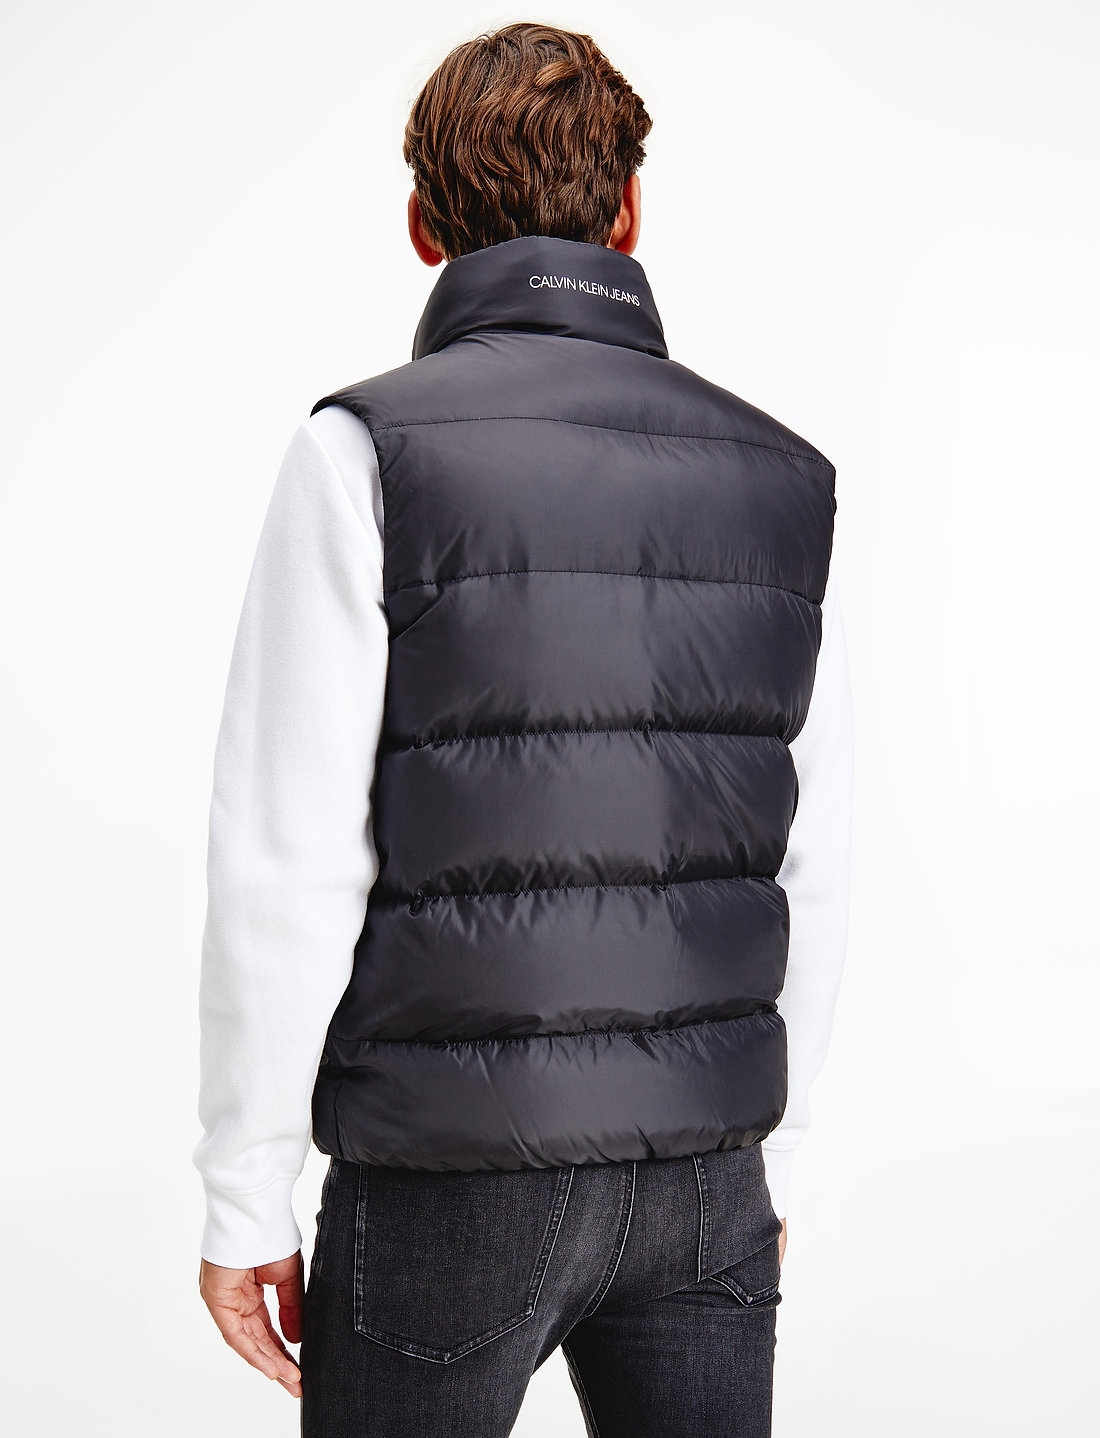 Calvin Klein Jeans Ess Down Vest - 199.90 €. Buy Vests from Calvin Klein  Jeans online at Boozt.com. Fast delivery and easy returns